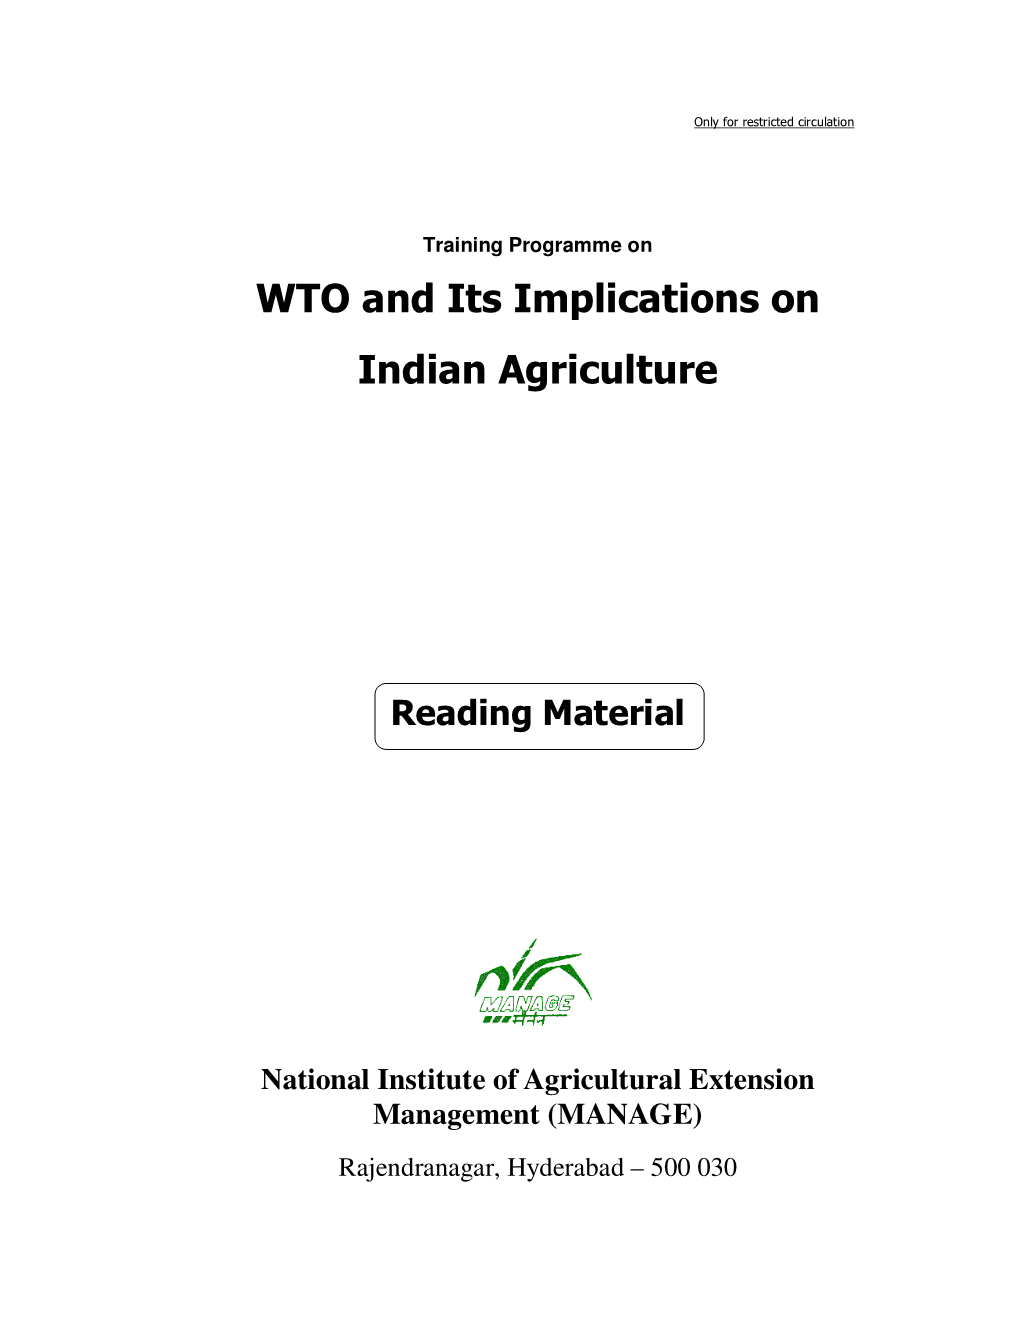 WTO and Its Implications on Indian Agriculture